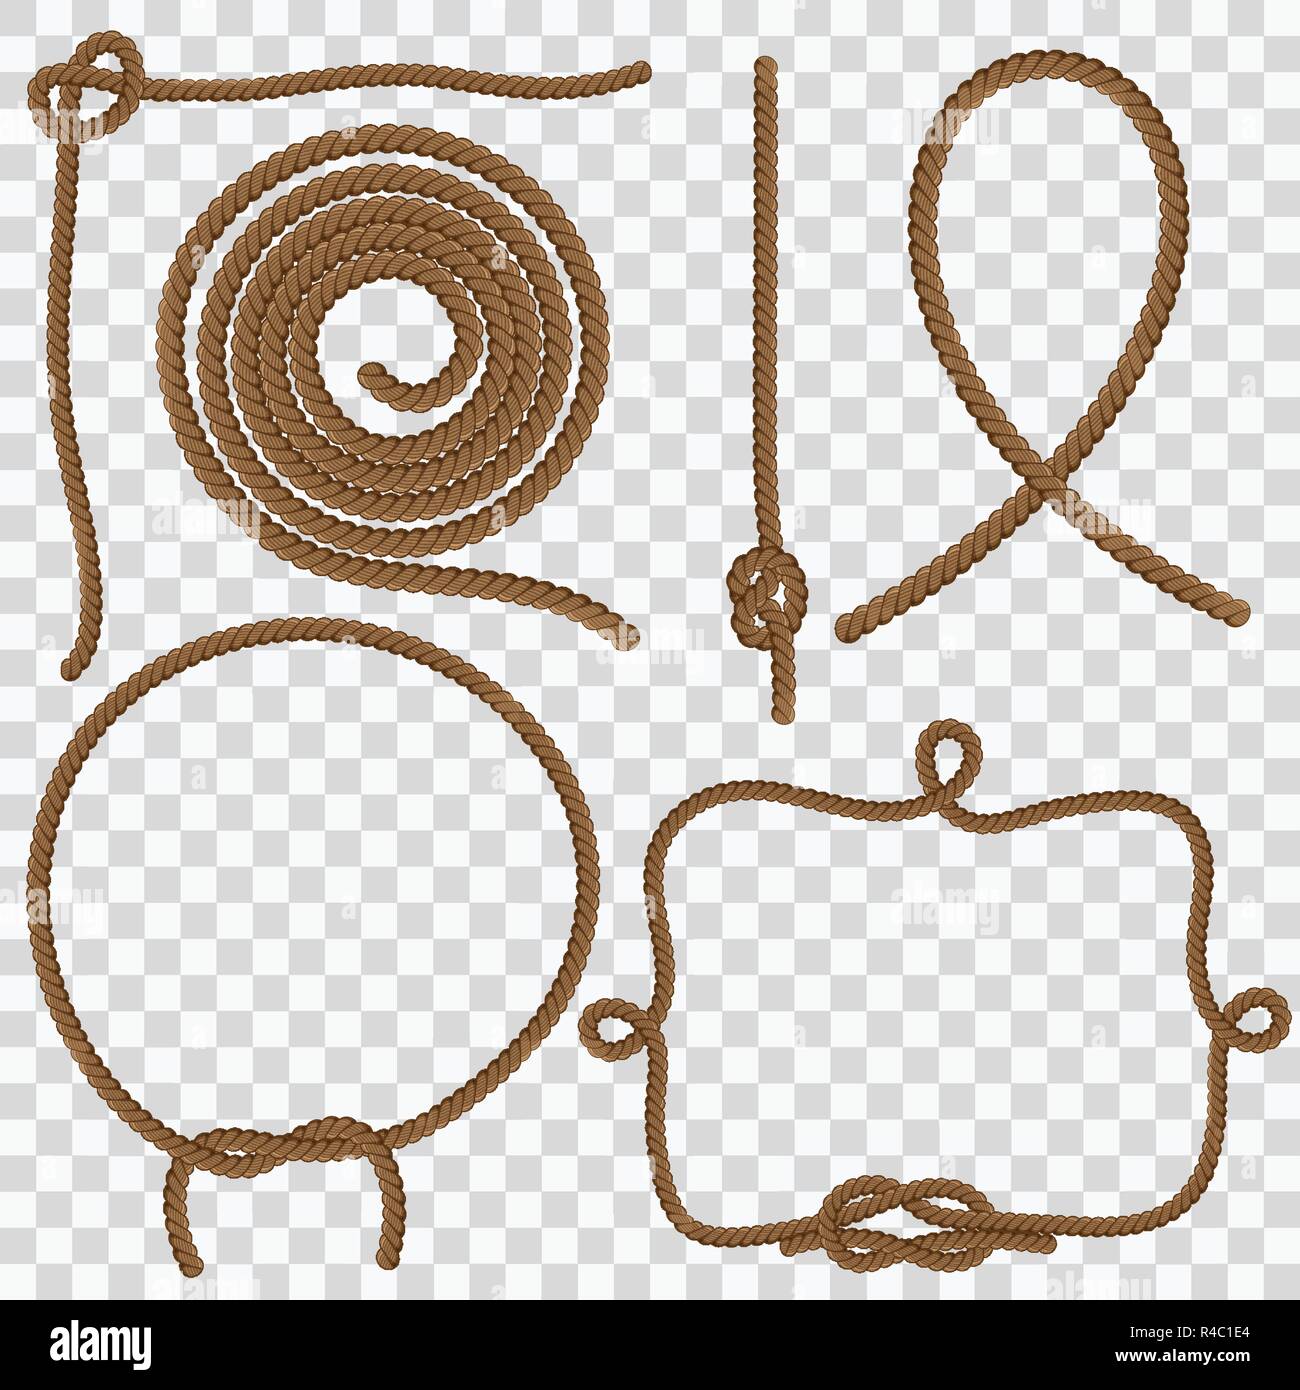 Ropes and Knots Stock Vector